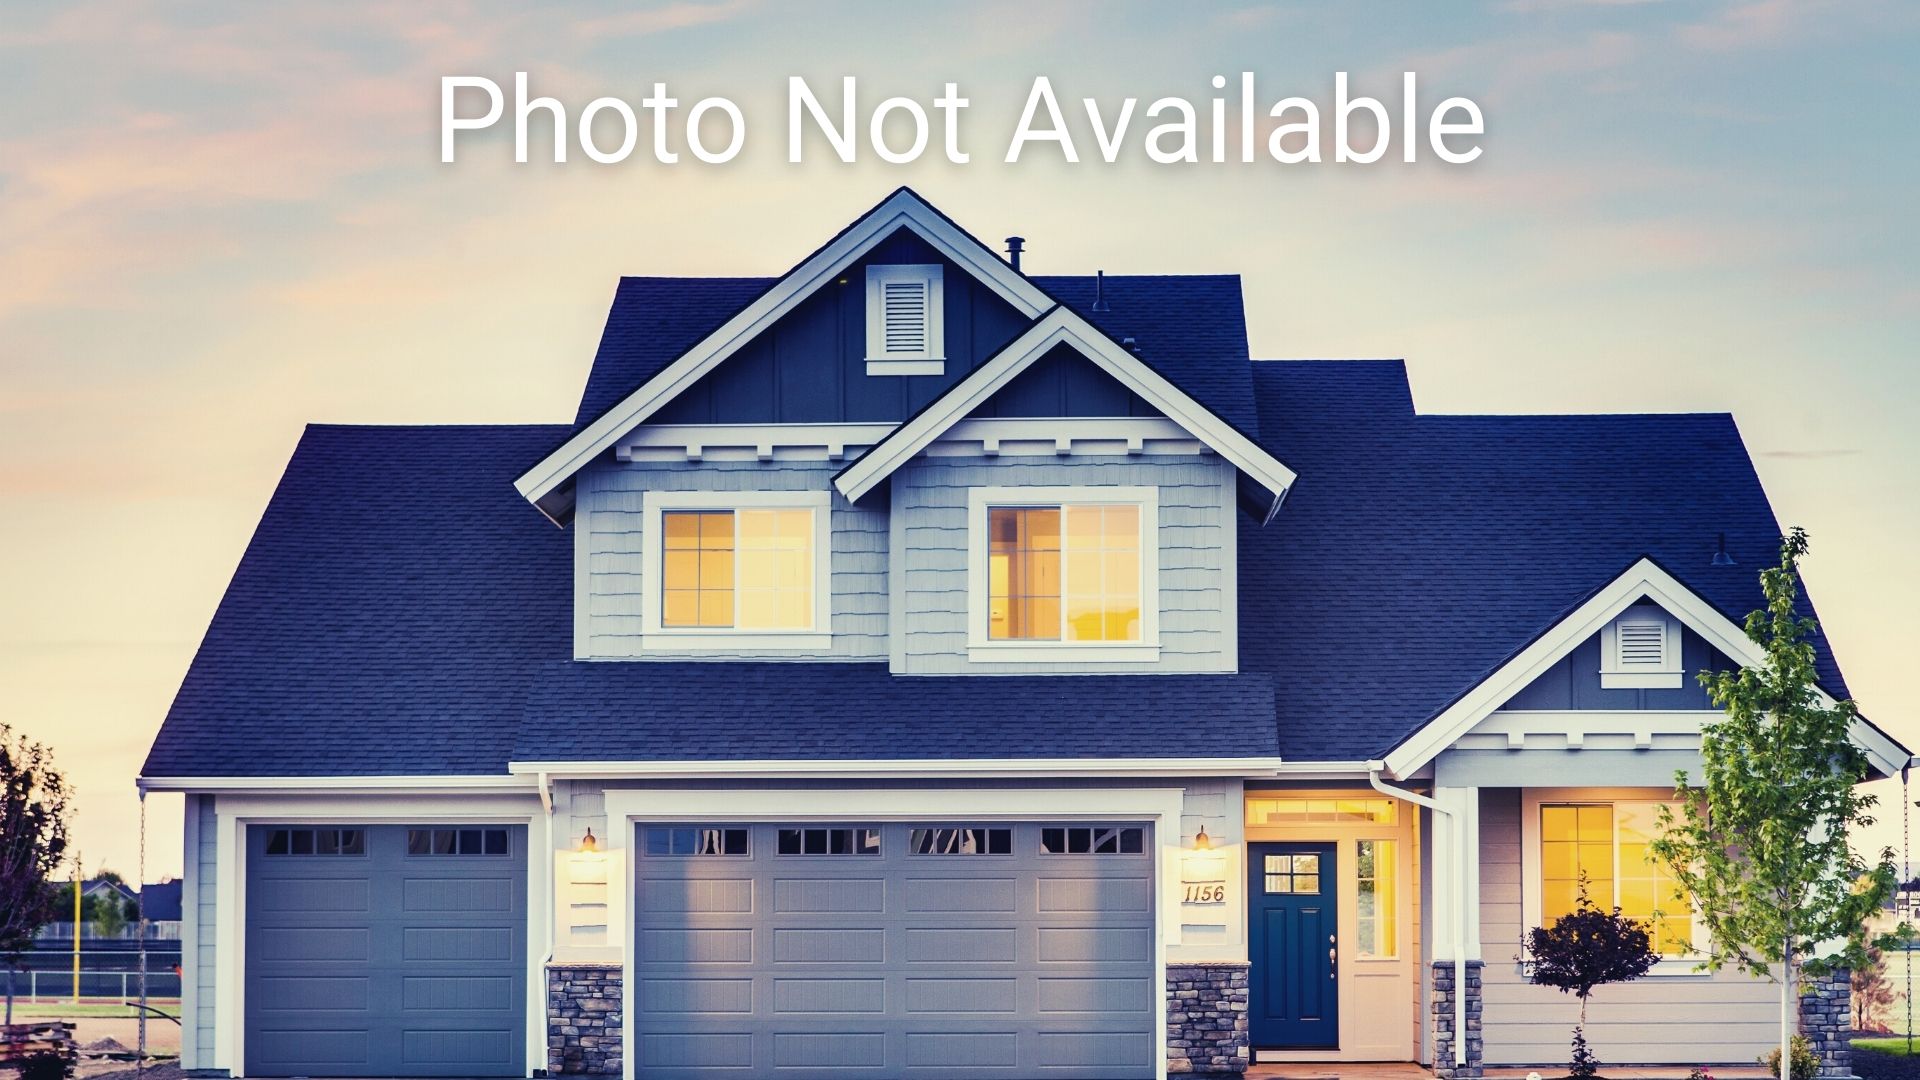 Placeholder image for 604 Pond View Dr 